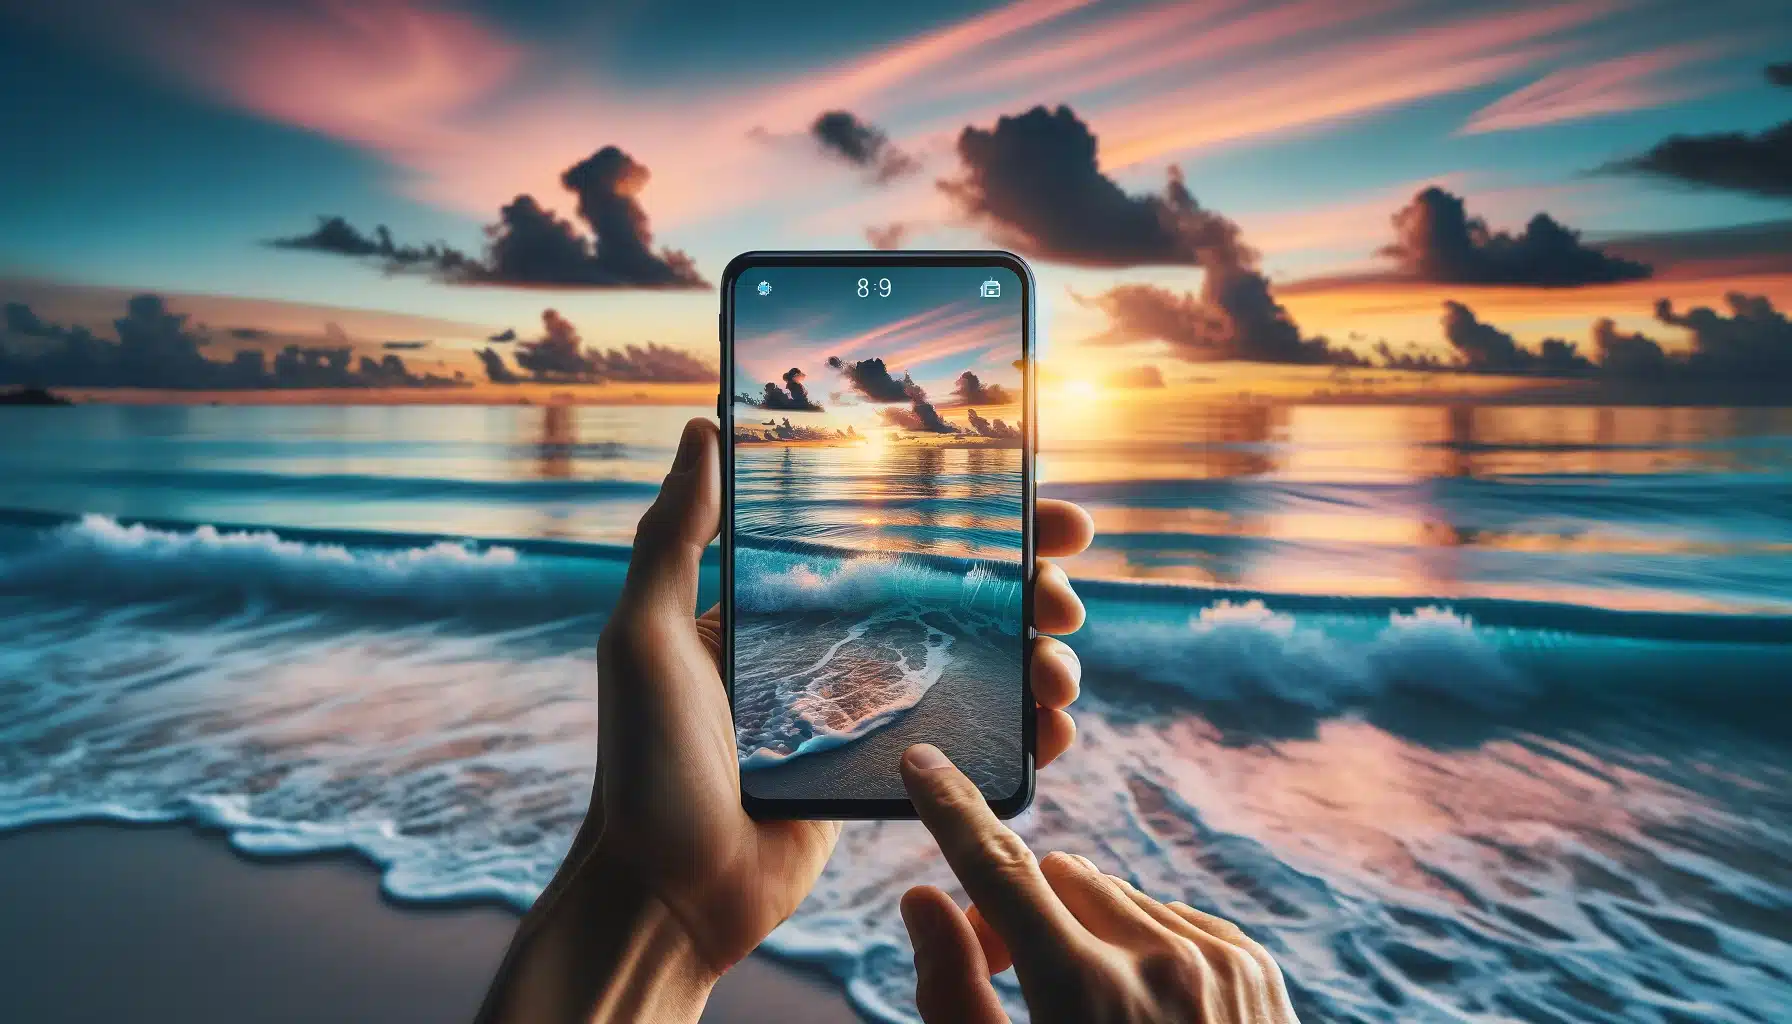 A serene seascape scene at sunset with a person using a smartphone to take photos of the ocean, capturing the beautiful colors of the sky and sea.